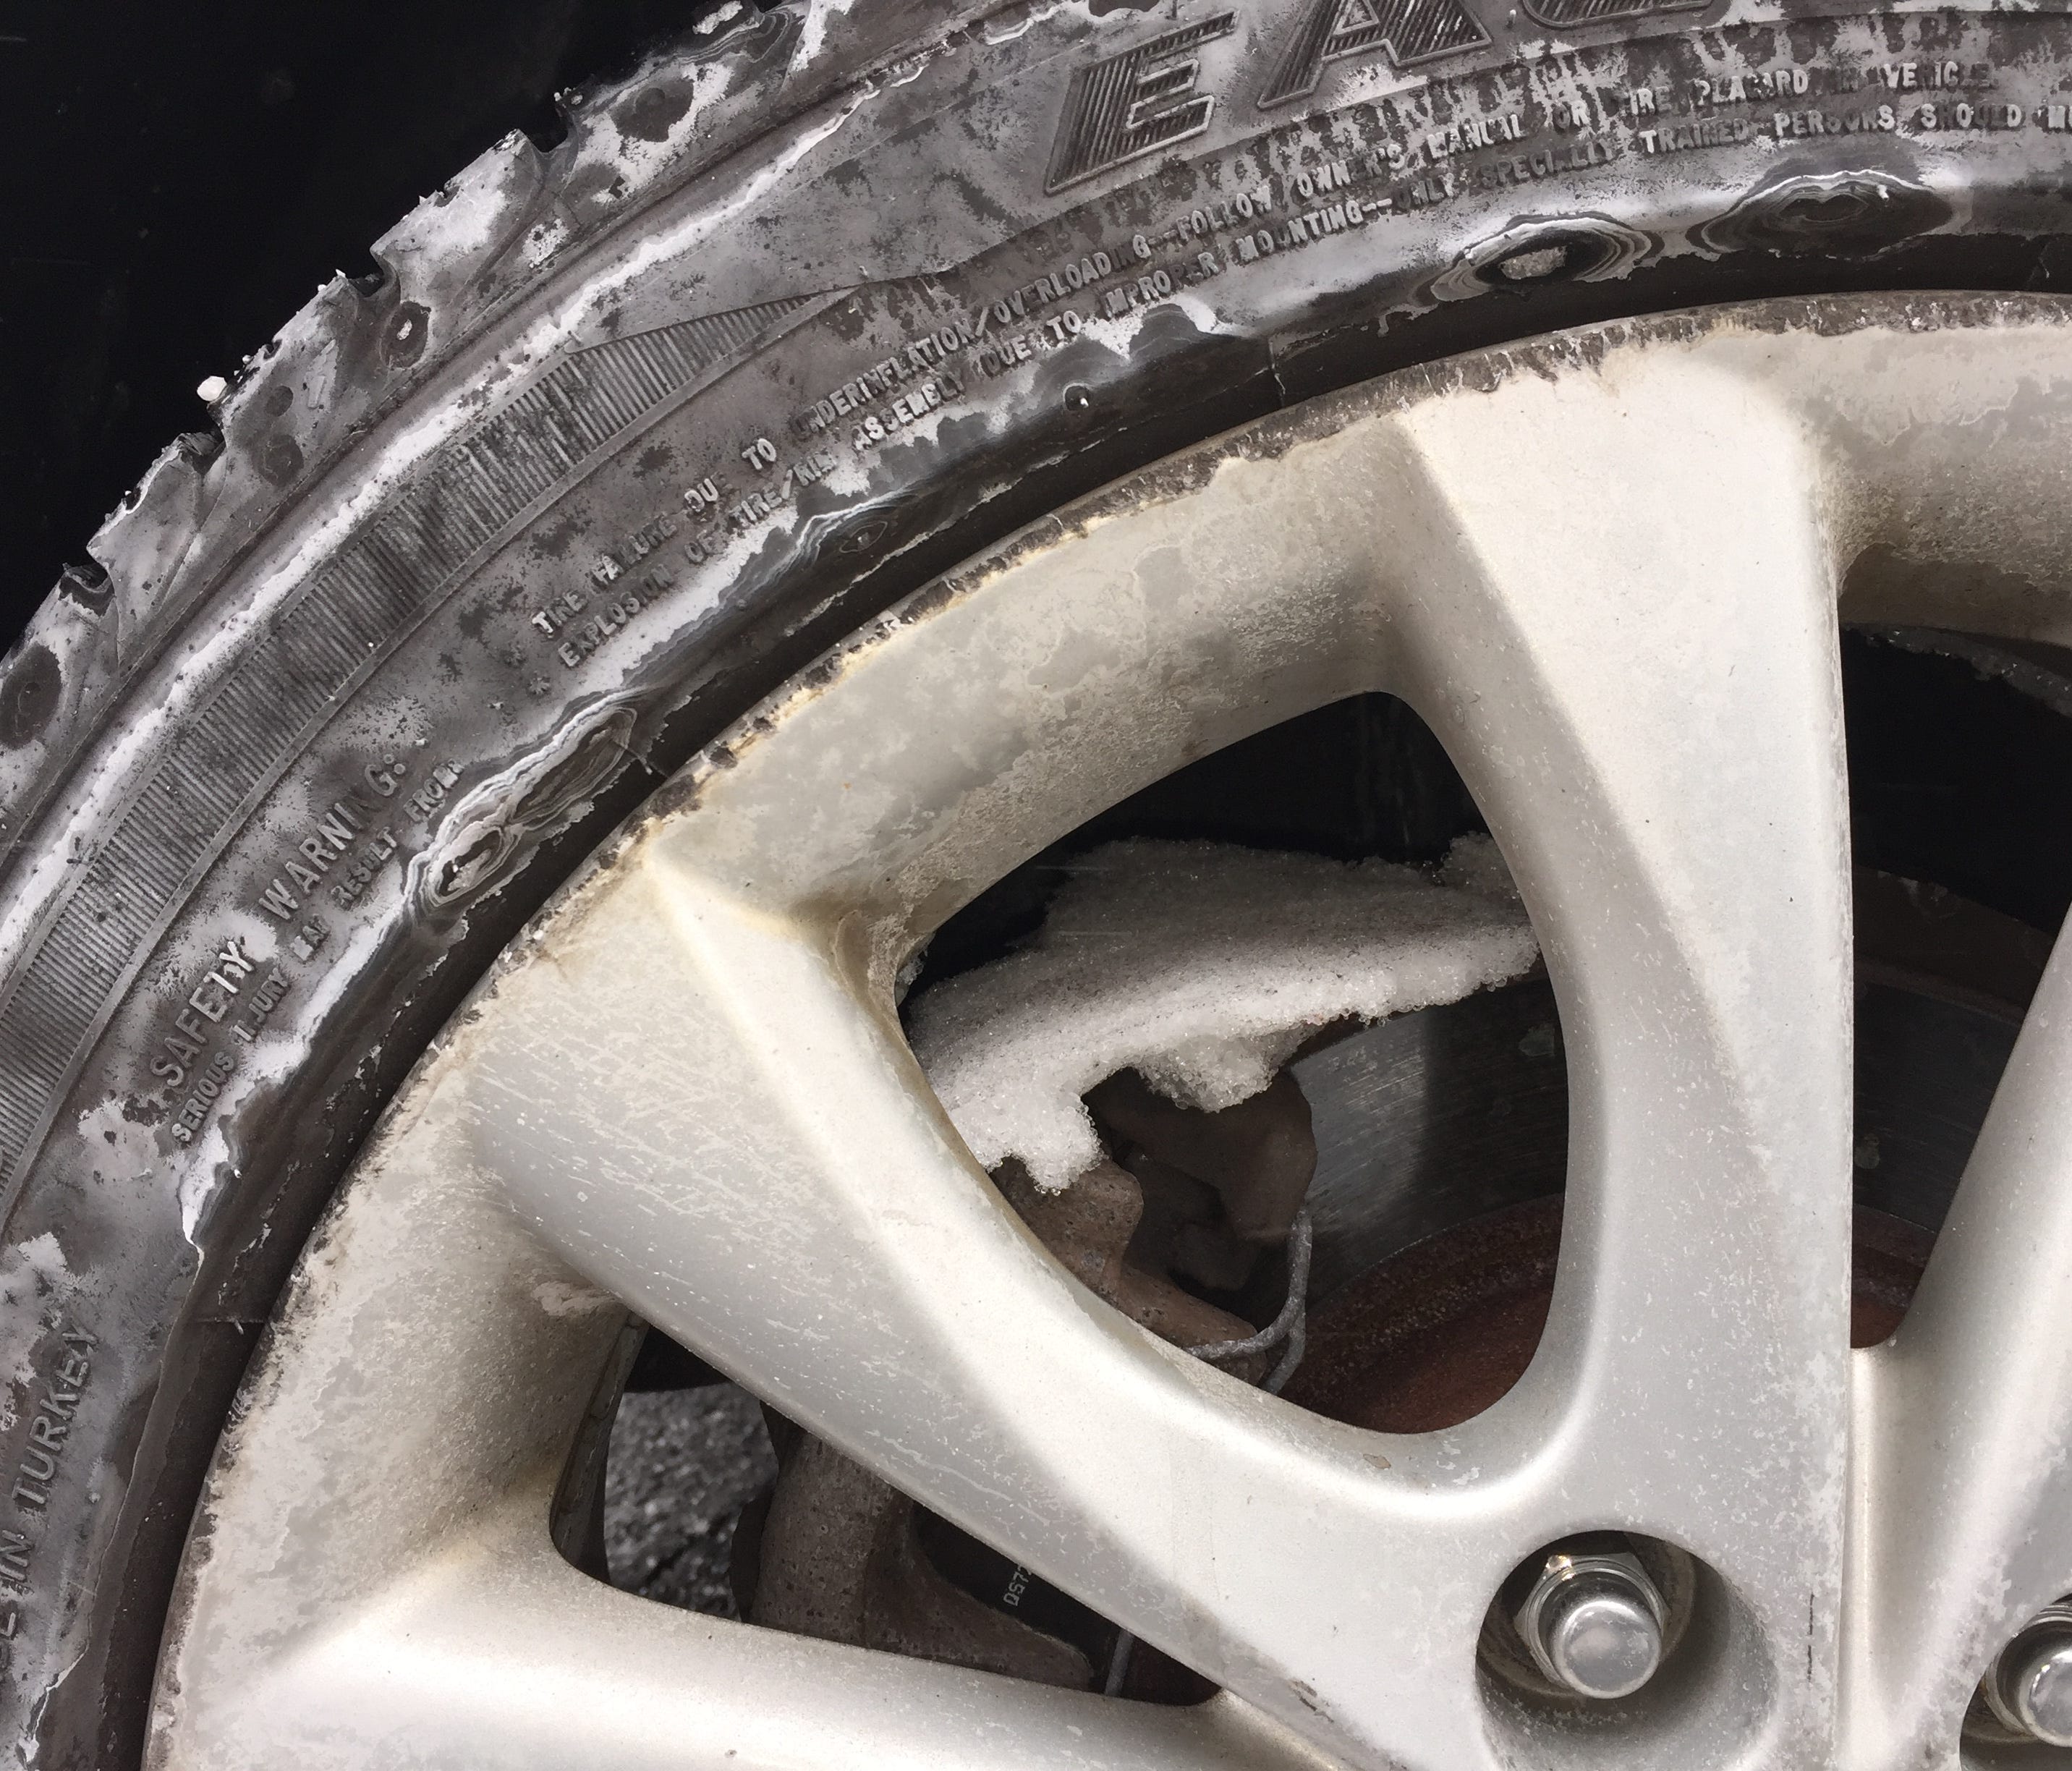 Snow buildup in the wheels of a car after Tuesday's winter storm.